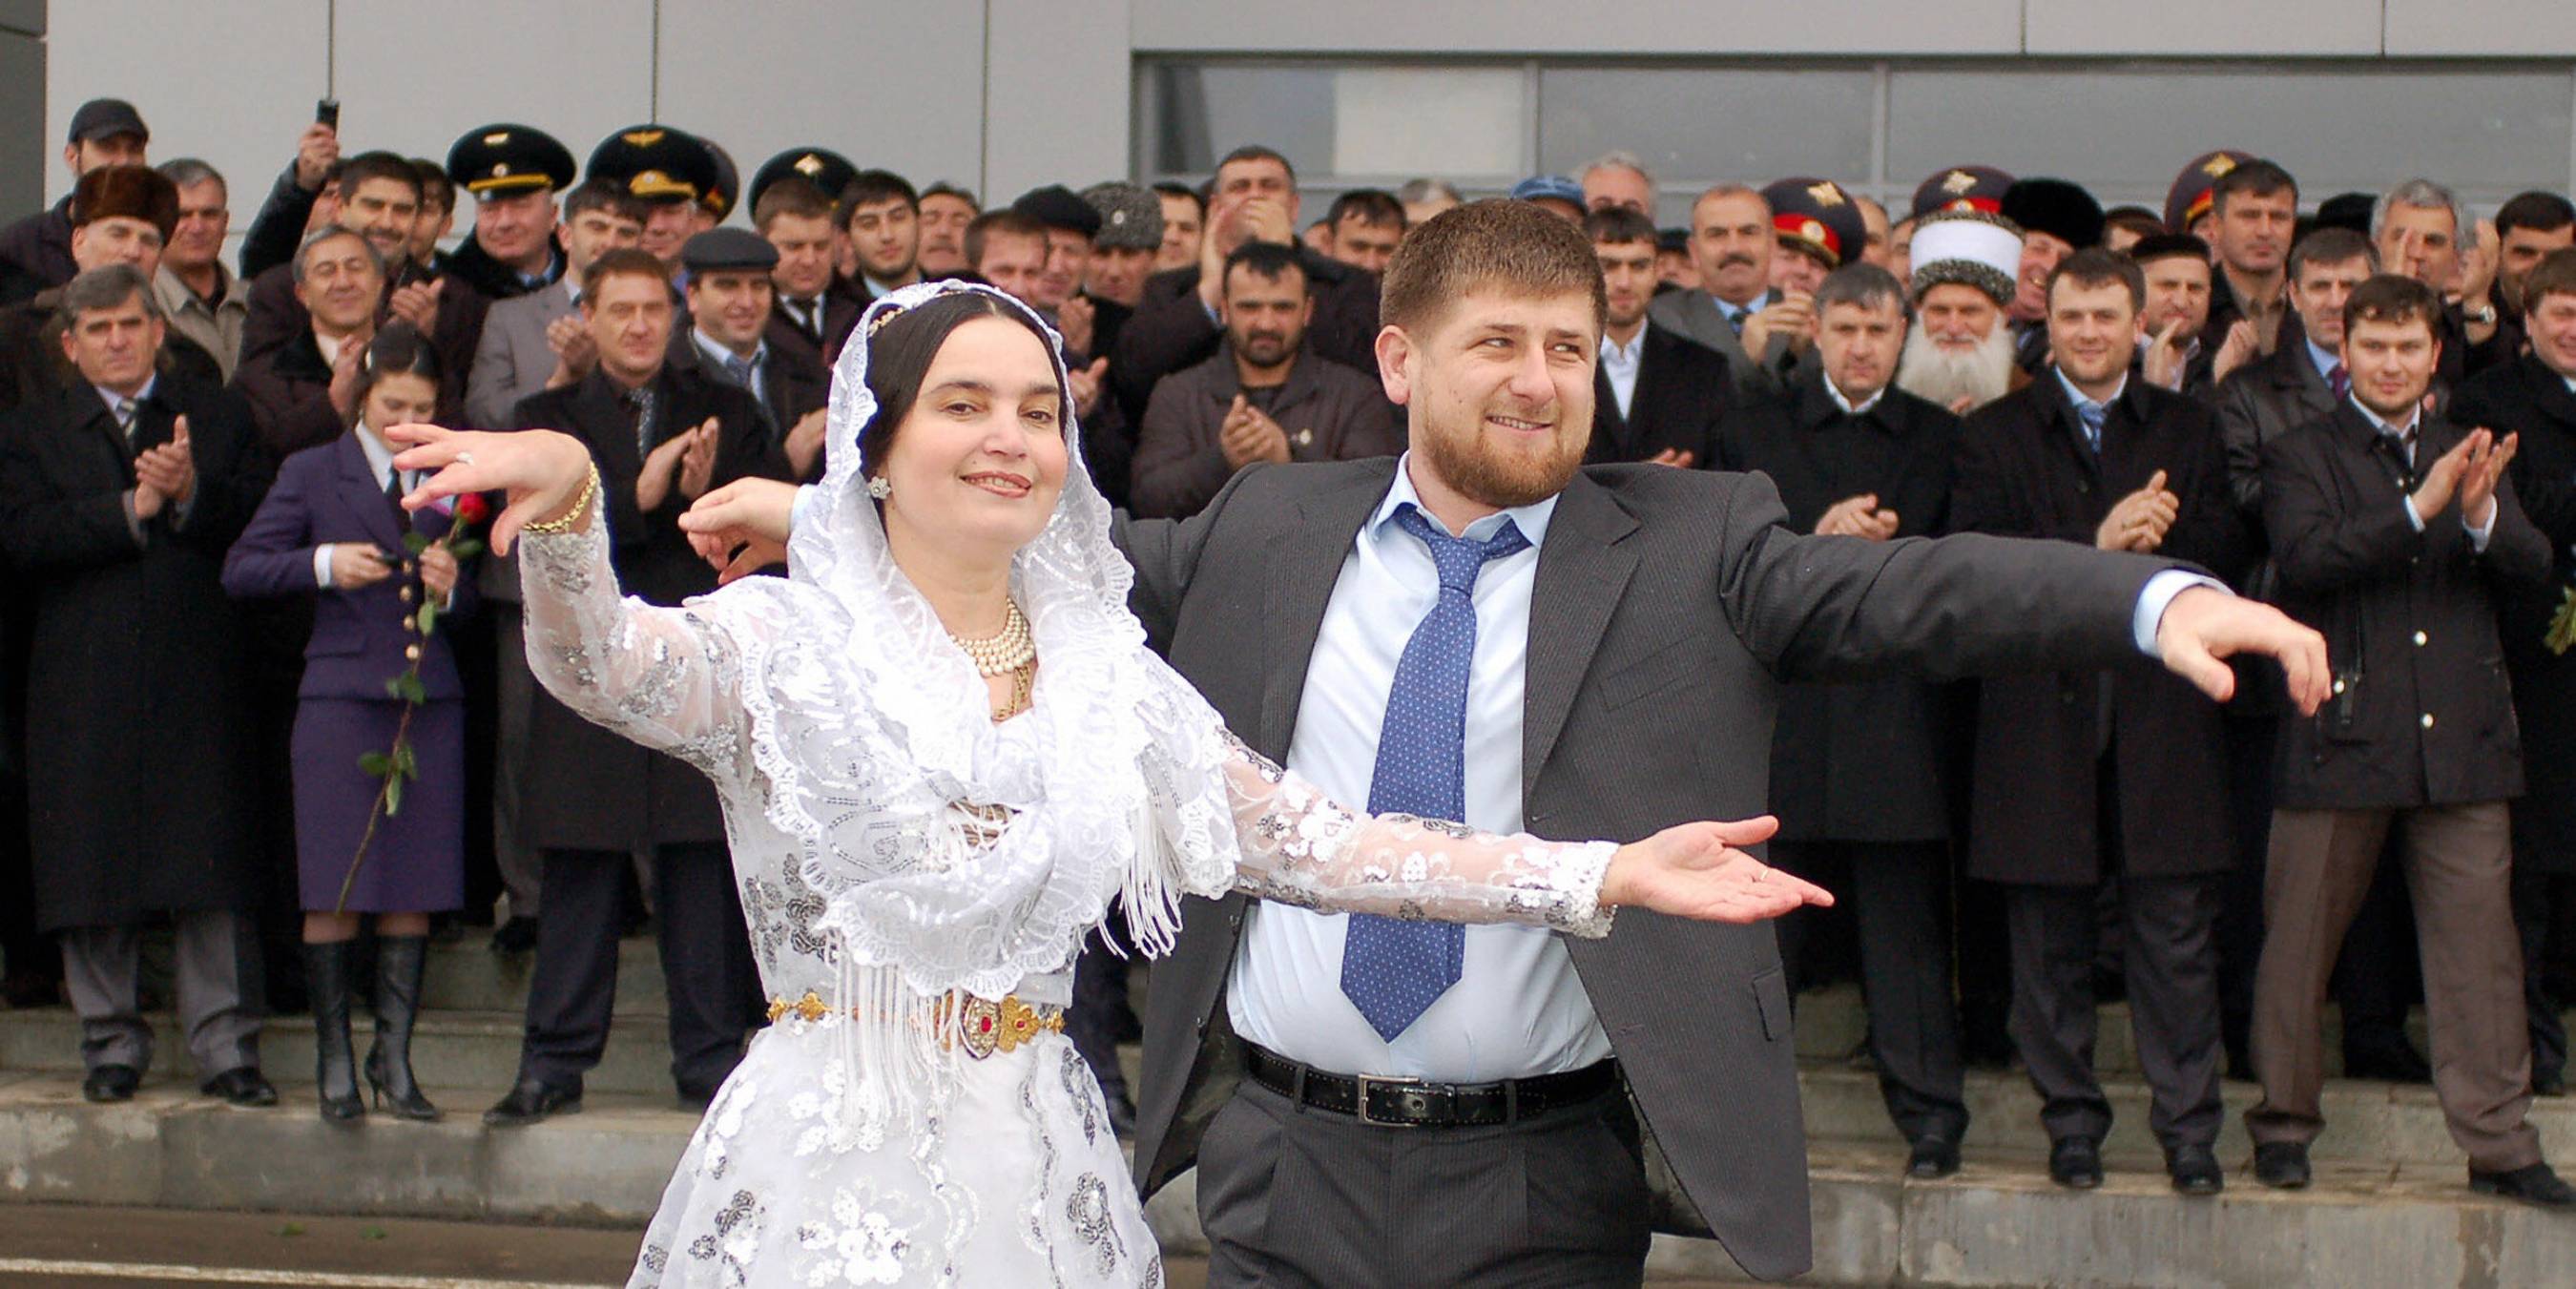 Chechen President Ramsan Kadyrov dances with a woman as they wait for a first flight at the airport in Grozny, 08 March 2007. (Photo credit should read DMITRY NIKOFOROV/AFP via Getty Images)